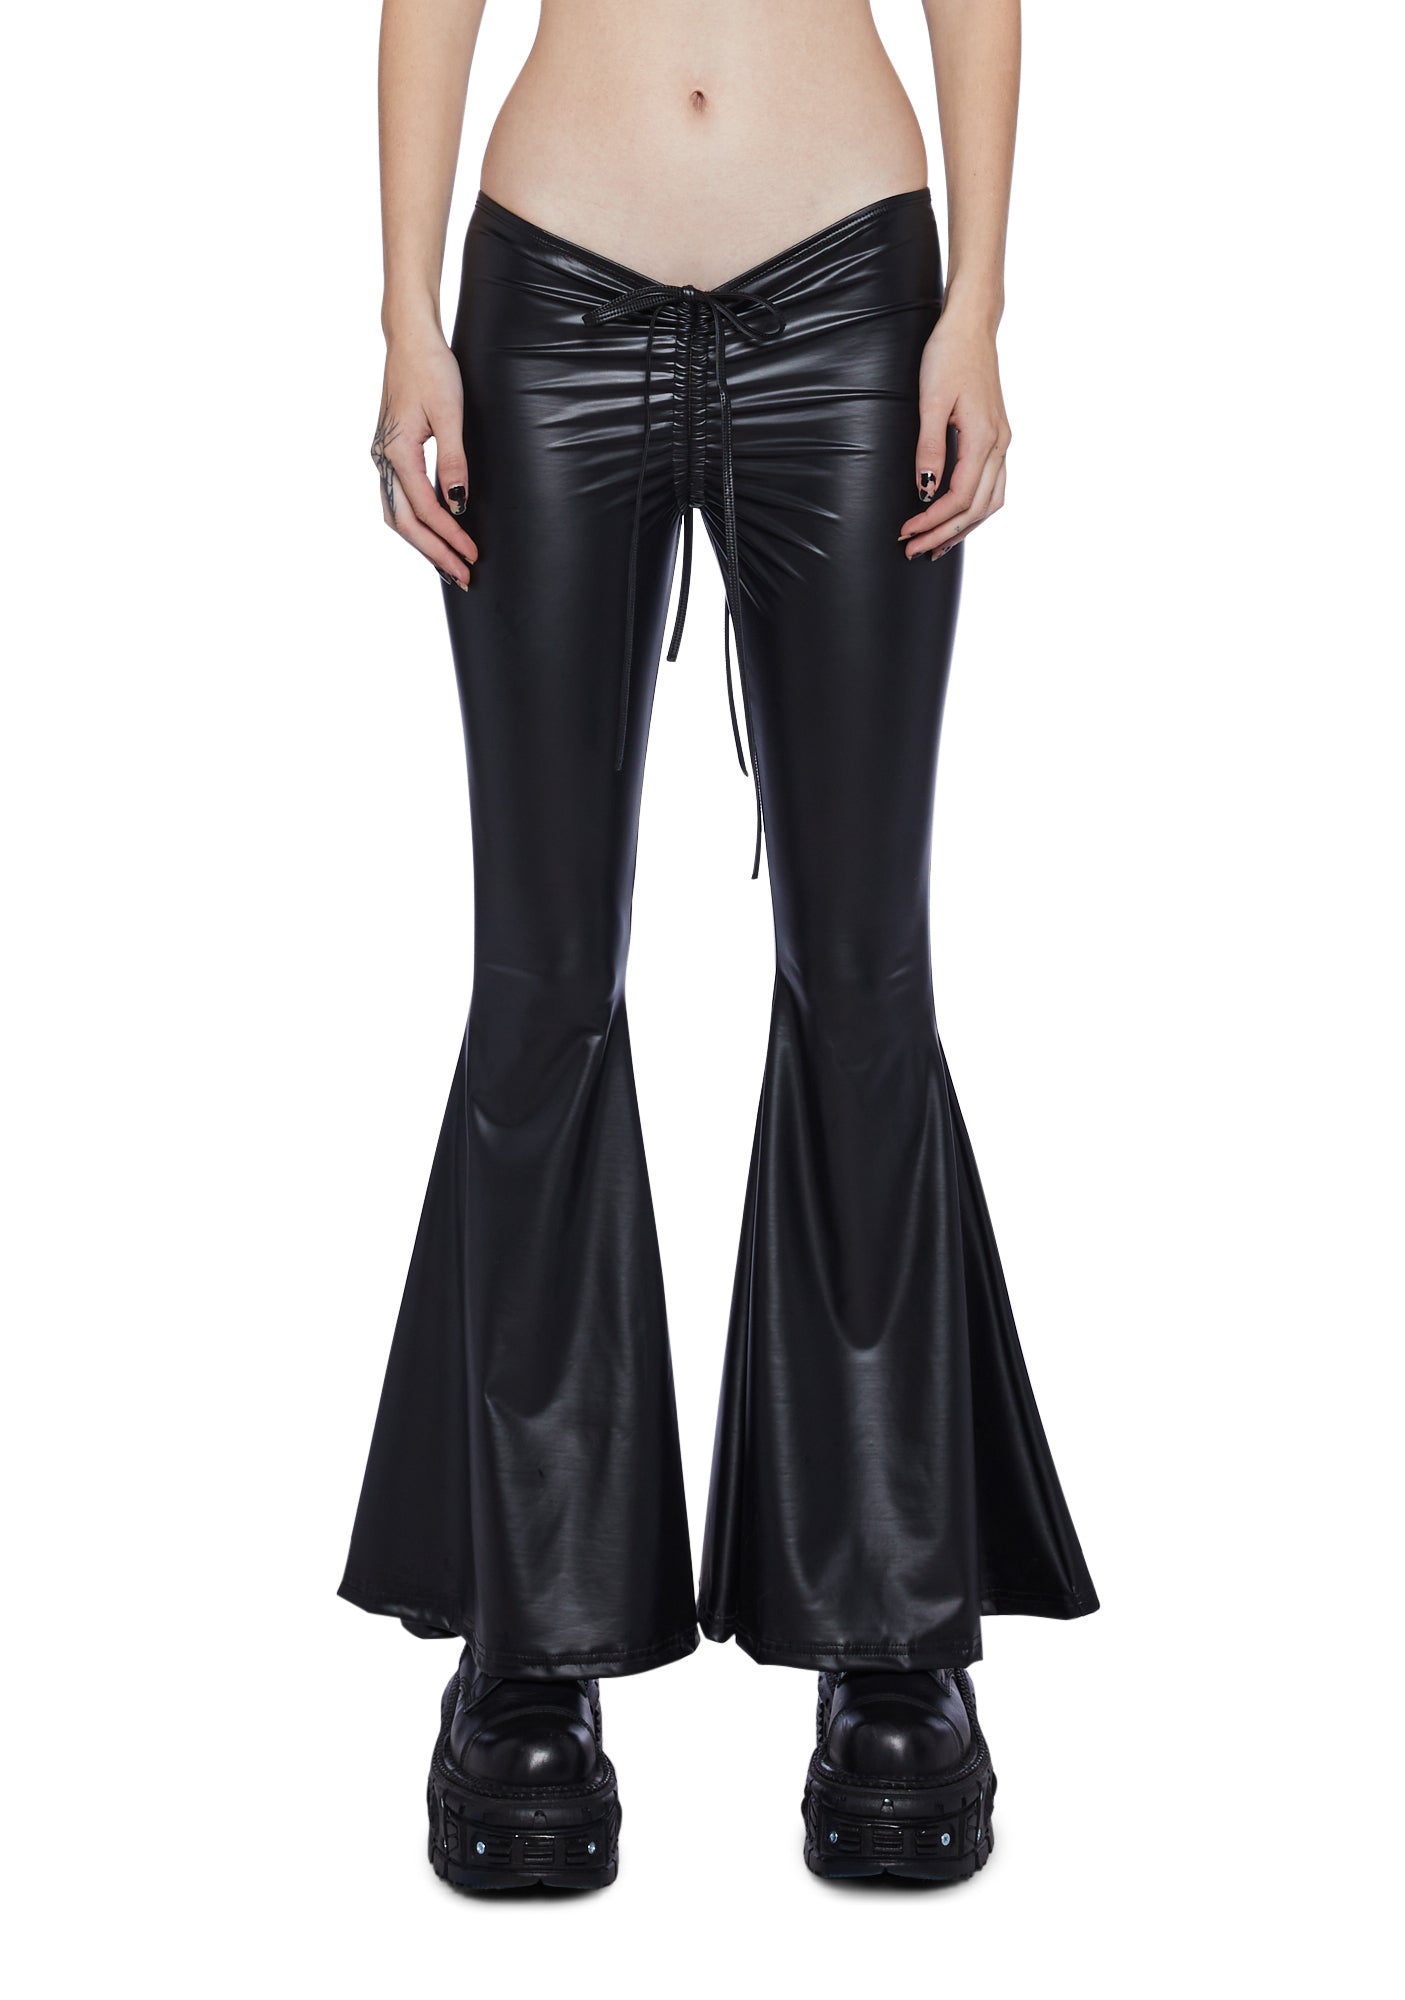 Bell bottom ladies leather pants